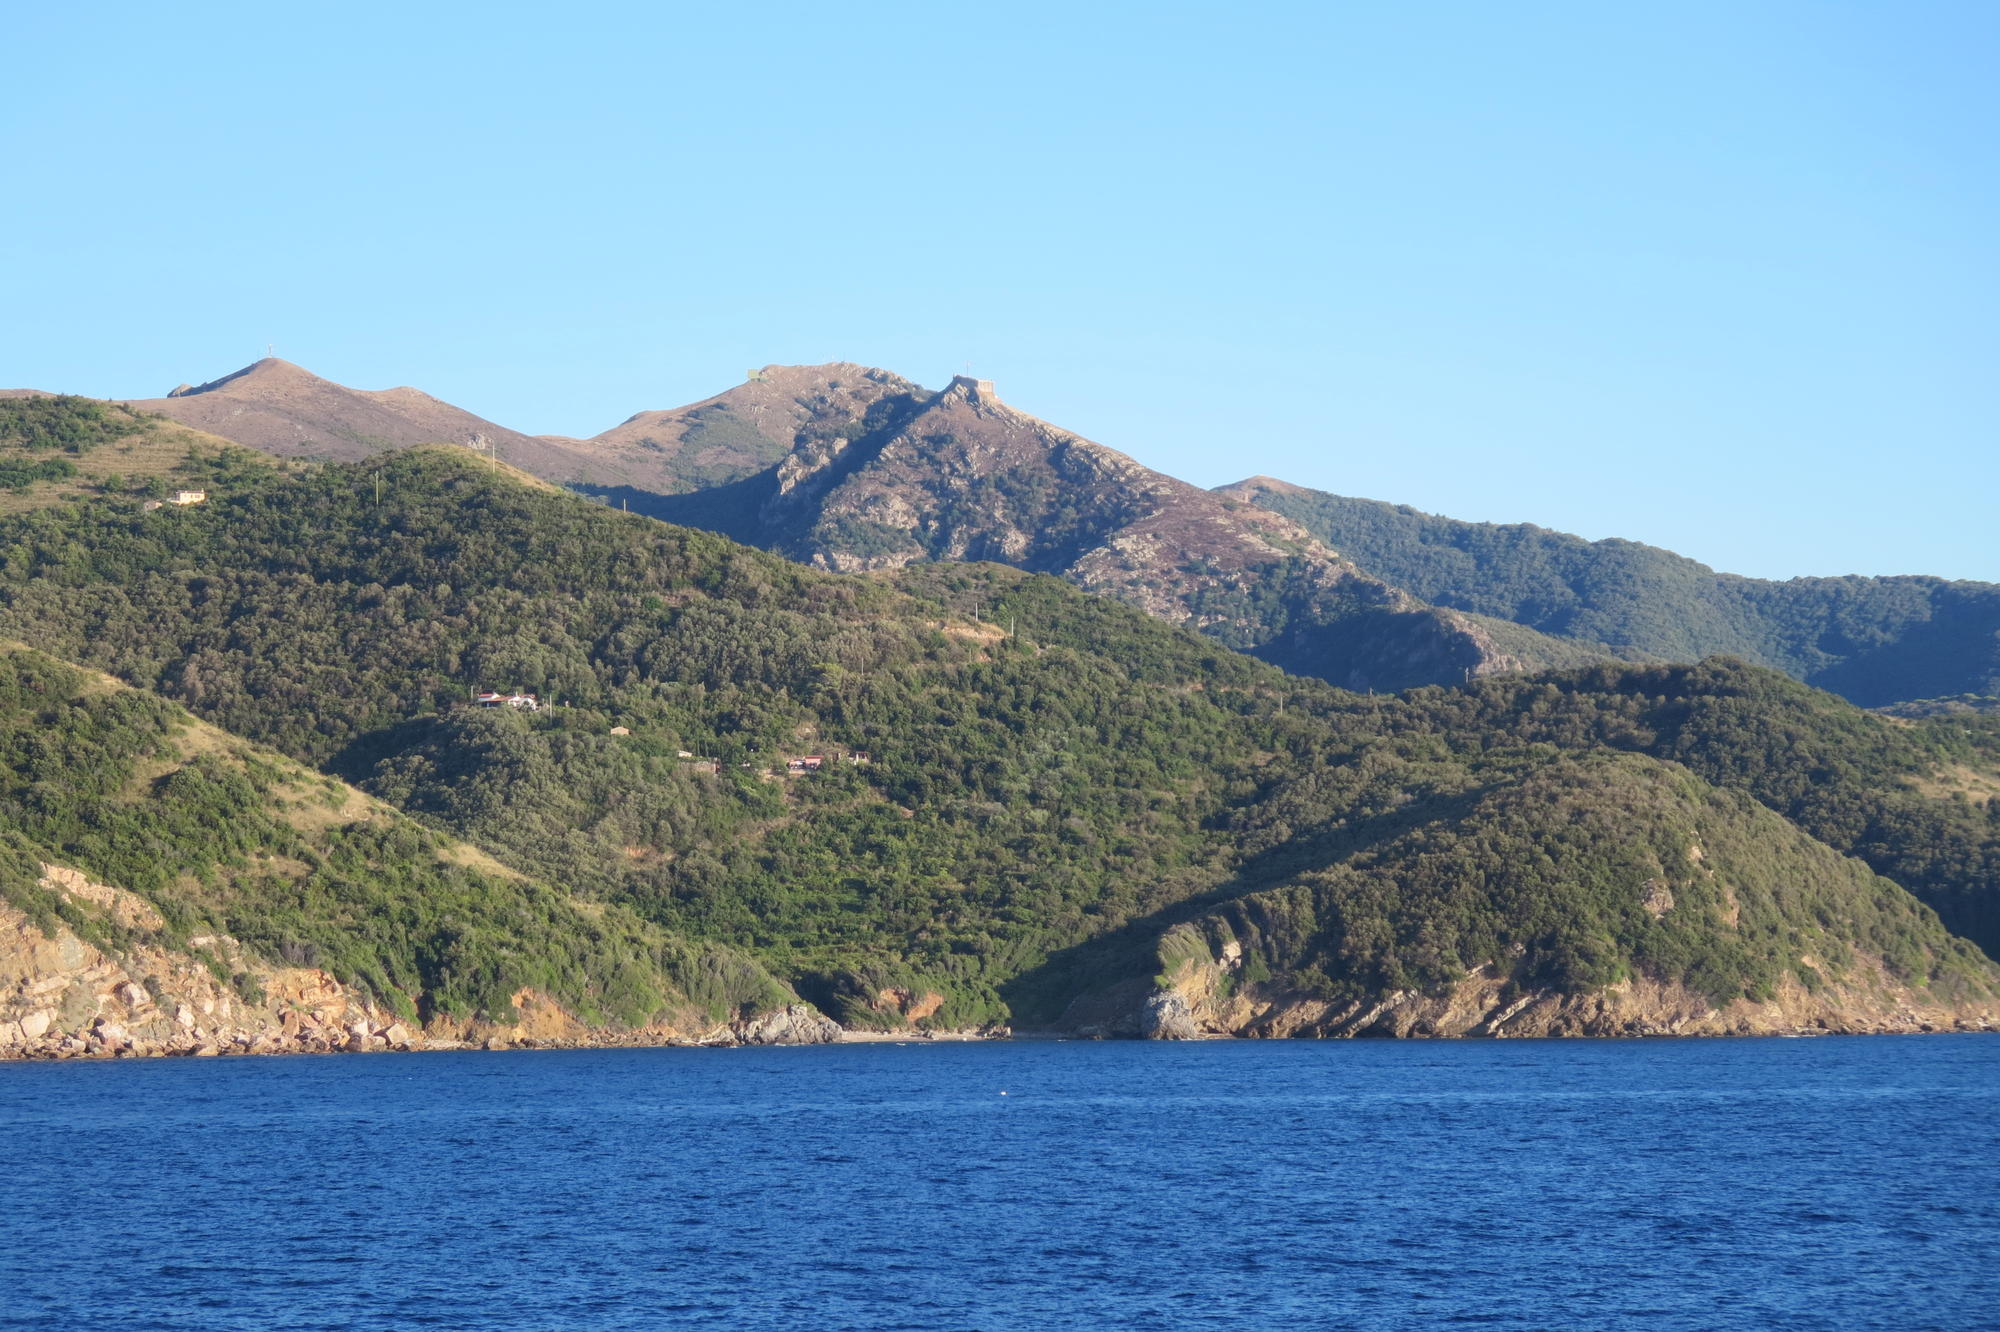 Today the Mediterranean island of Elba is a popular destination for tourists.